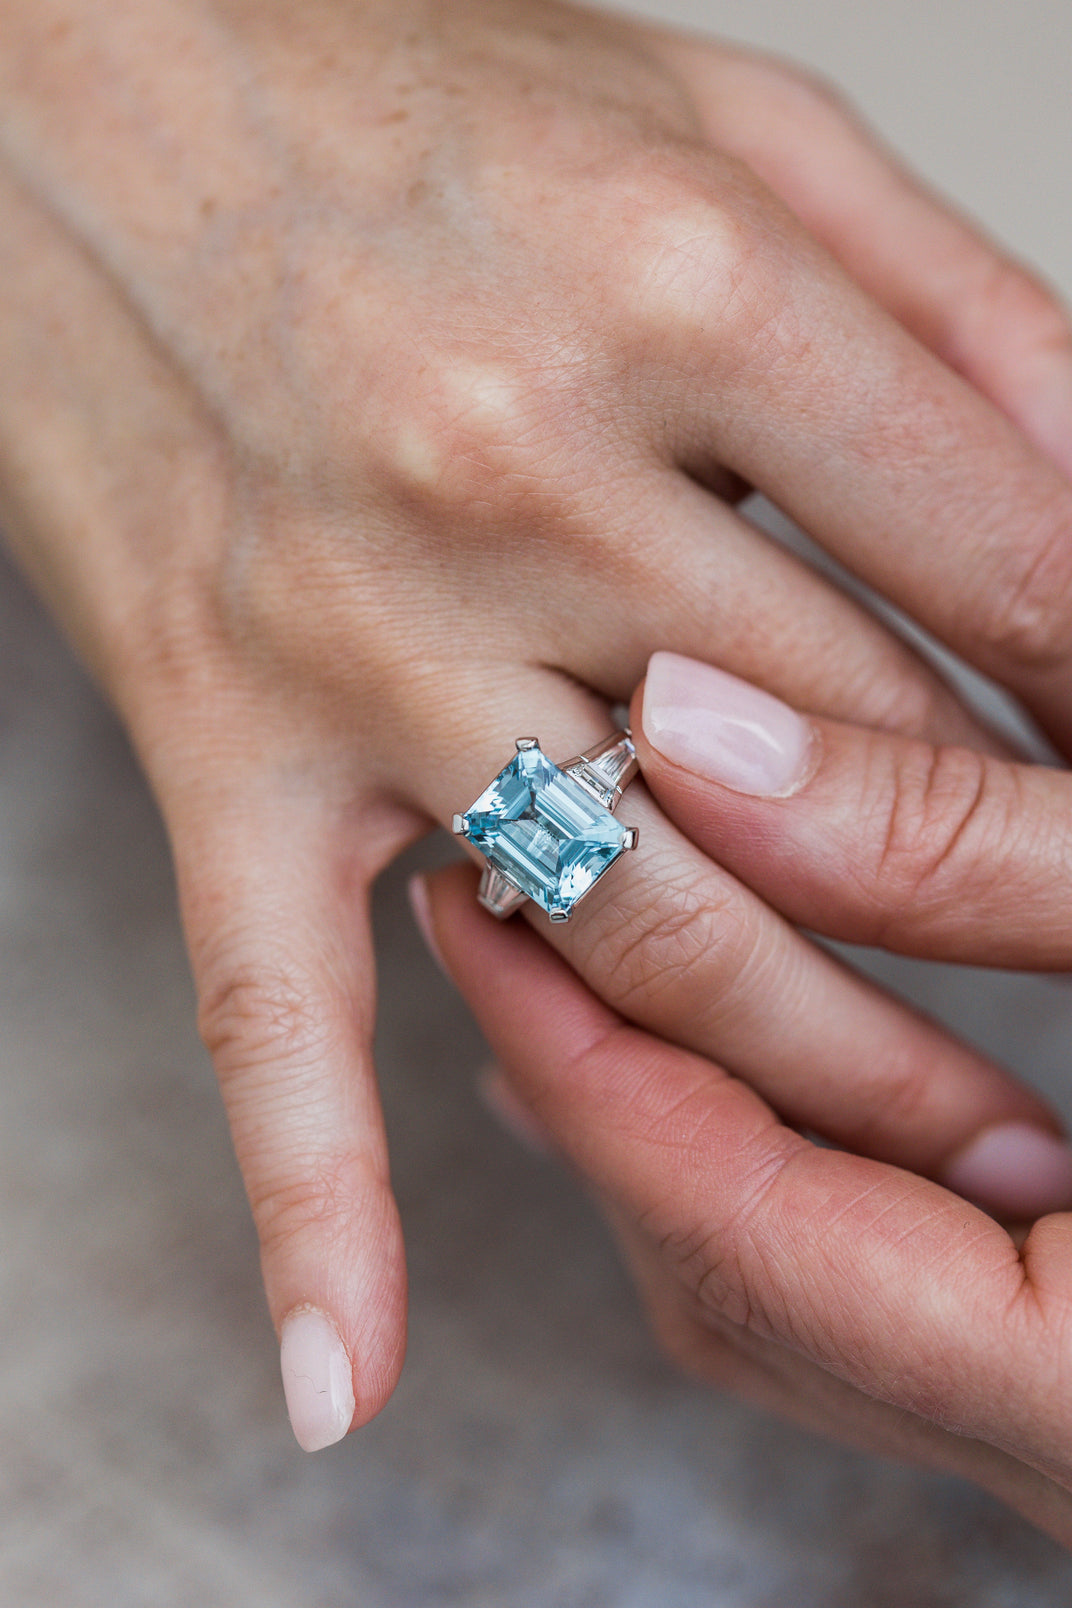 One of a Kind. Ring with Aquamarine and Diamonds